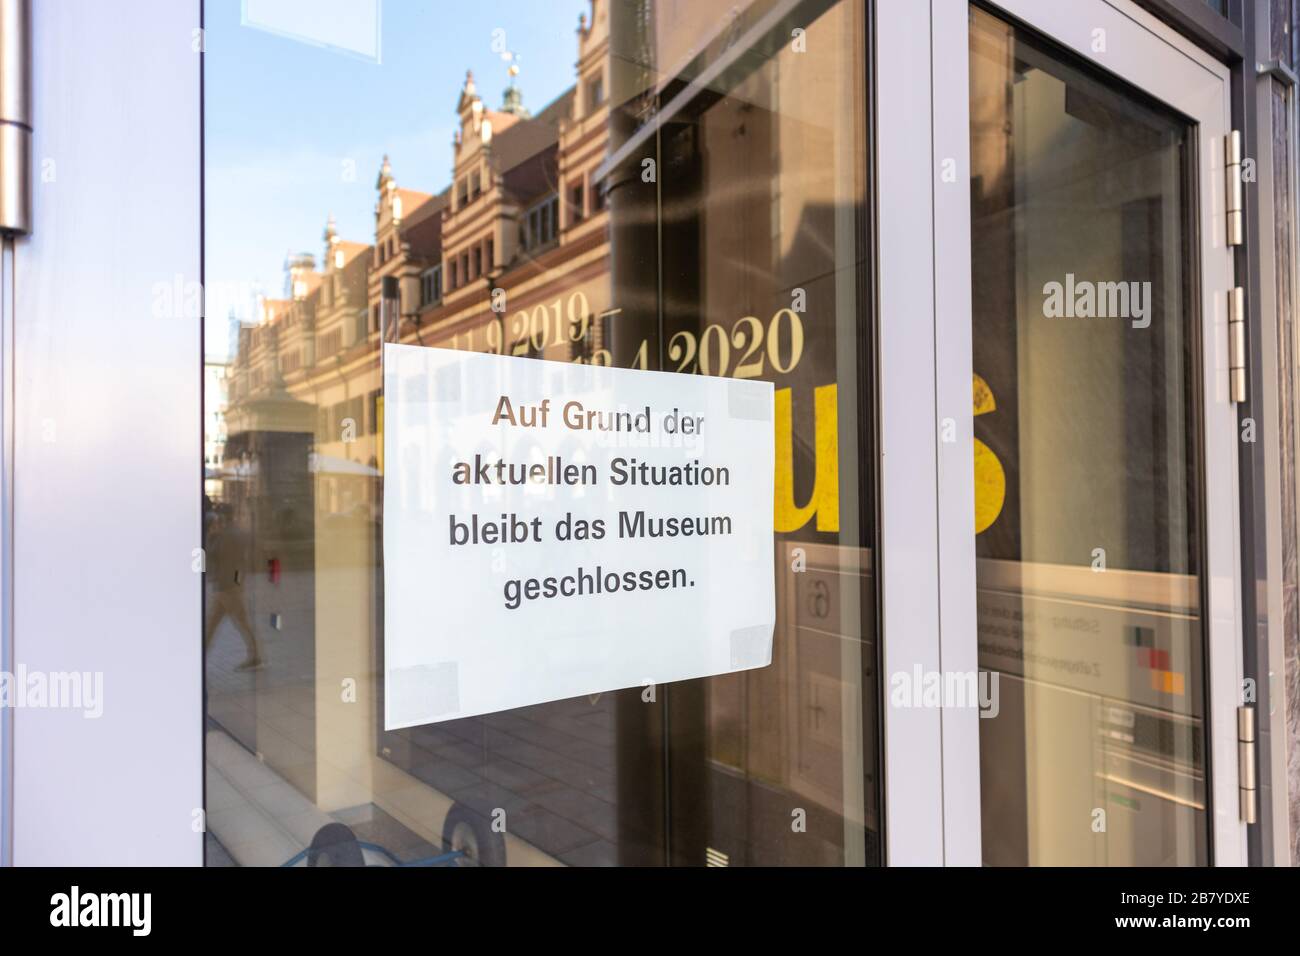 Leipzig, Germany, 03-18-020 Sign on a museum because of the Corona crisis 'due to the current situation the museum remains closed' Stock Photo